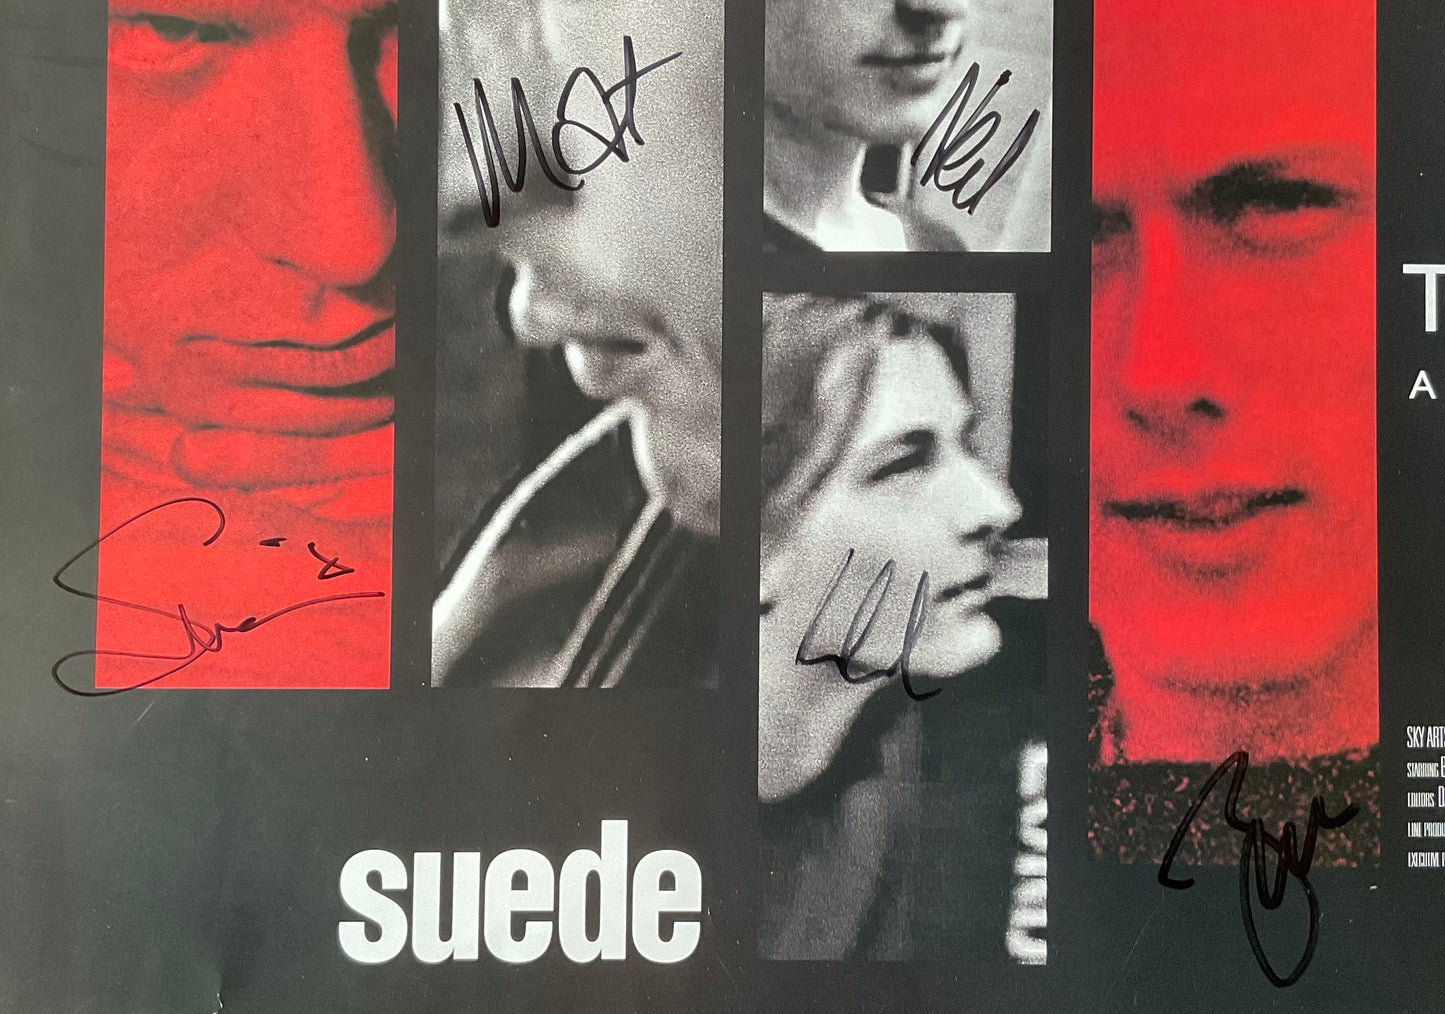 Suede The Insatiable Ones Original Fully Signed Autographed Promo Poster Sky Arts 2018